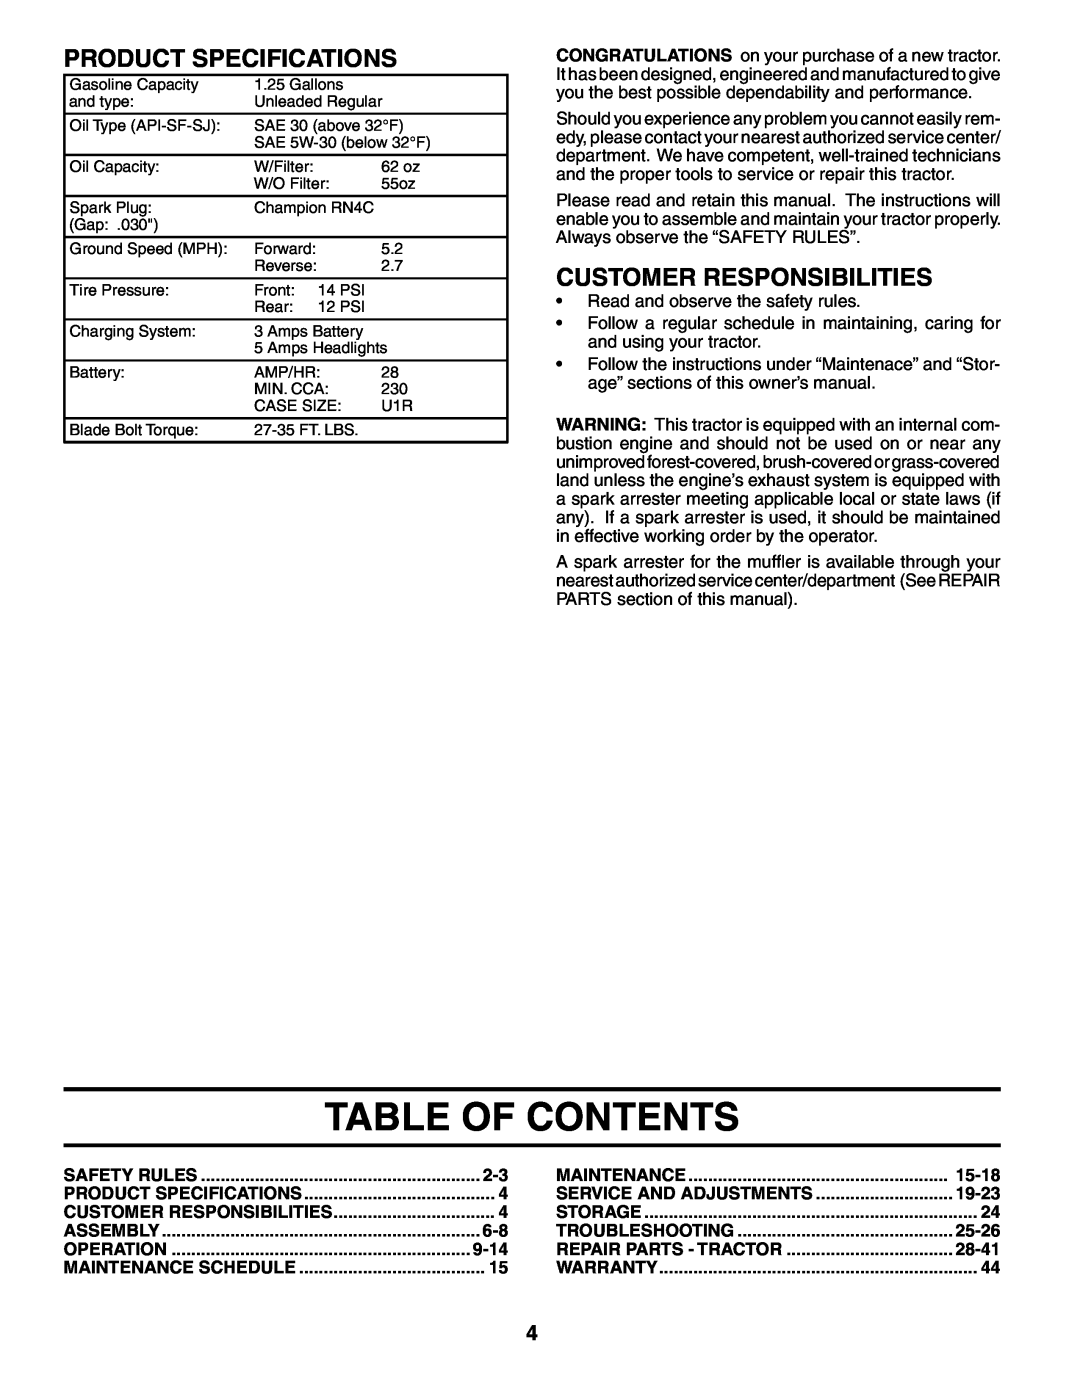 Weed Eater WET17H42STA manual Table Of Contents, Product Specifications, Customer Responsibilities 